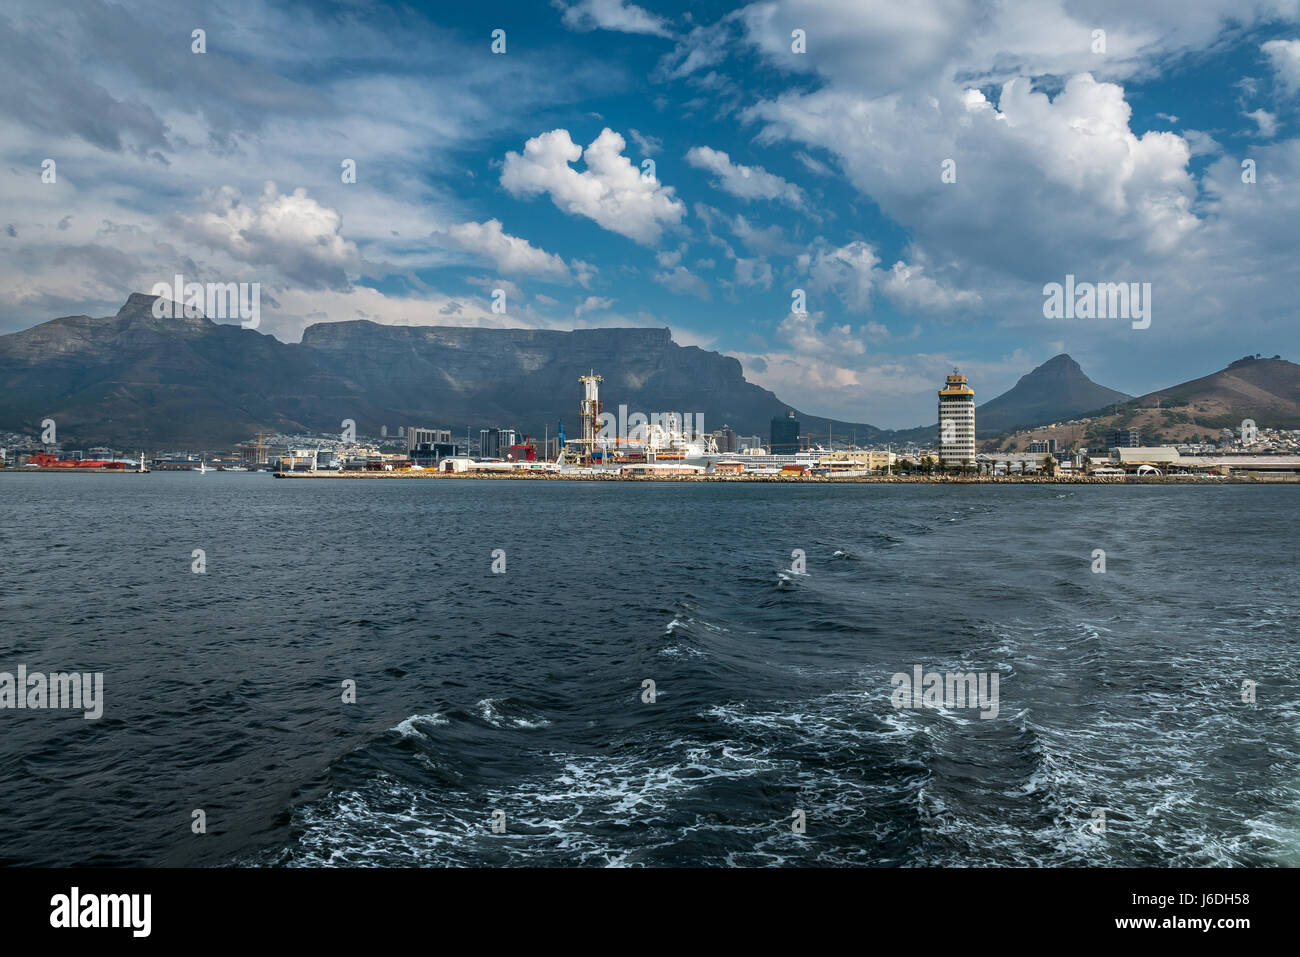 Table Mountain plateau outline seen from the sea with dramatic cloud formations and view of Port Authority tower, Cape Town, South Africa Stock Photo